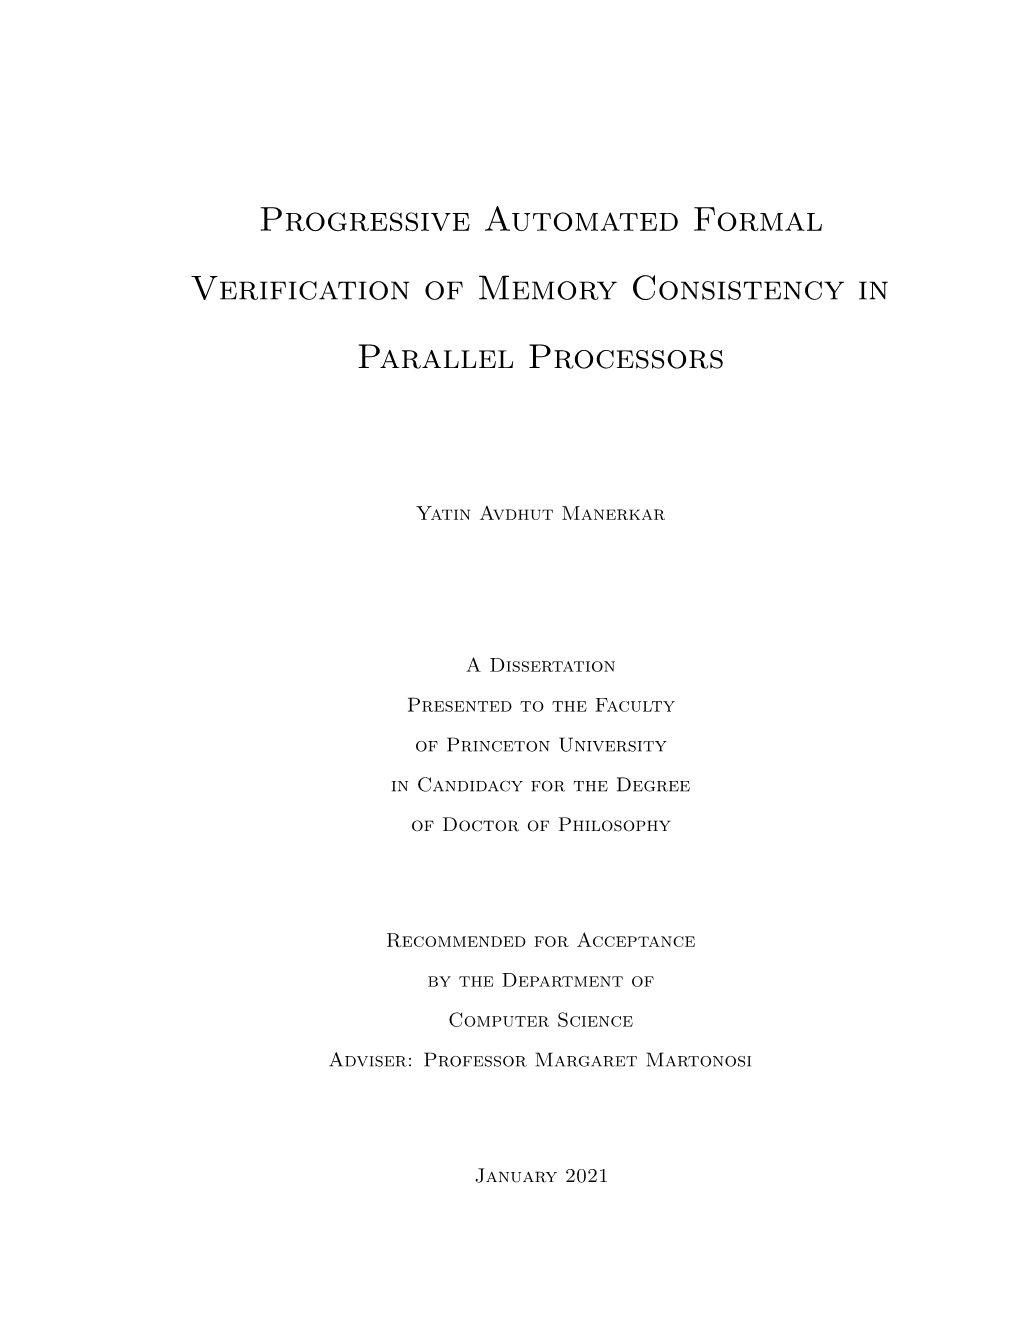 Progressive Automated Formal Verification of Memory Consistency in Parallel Processors